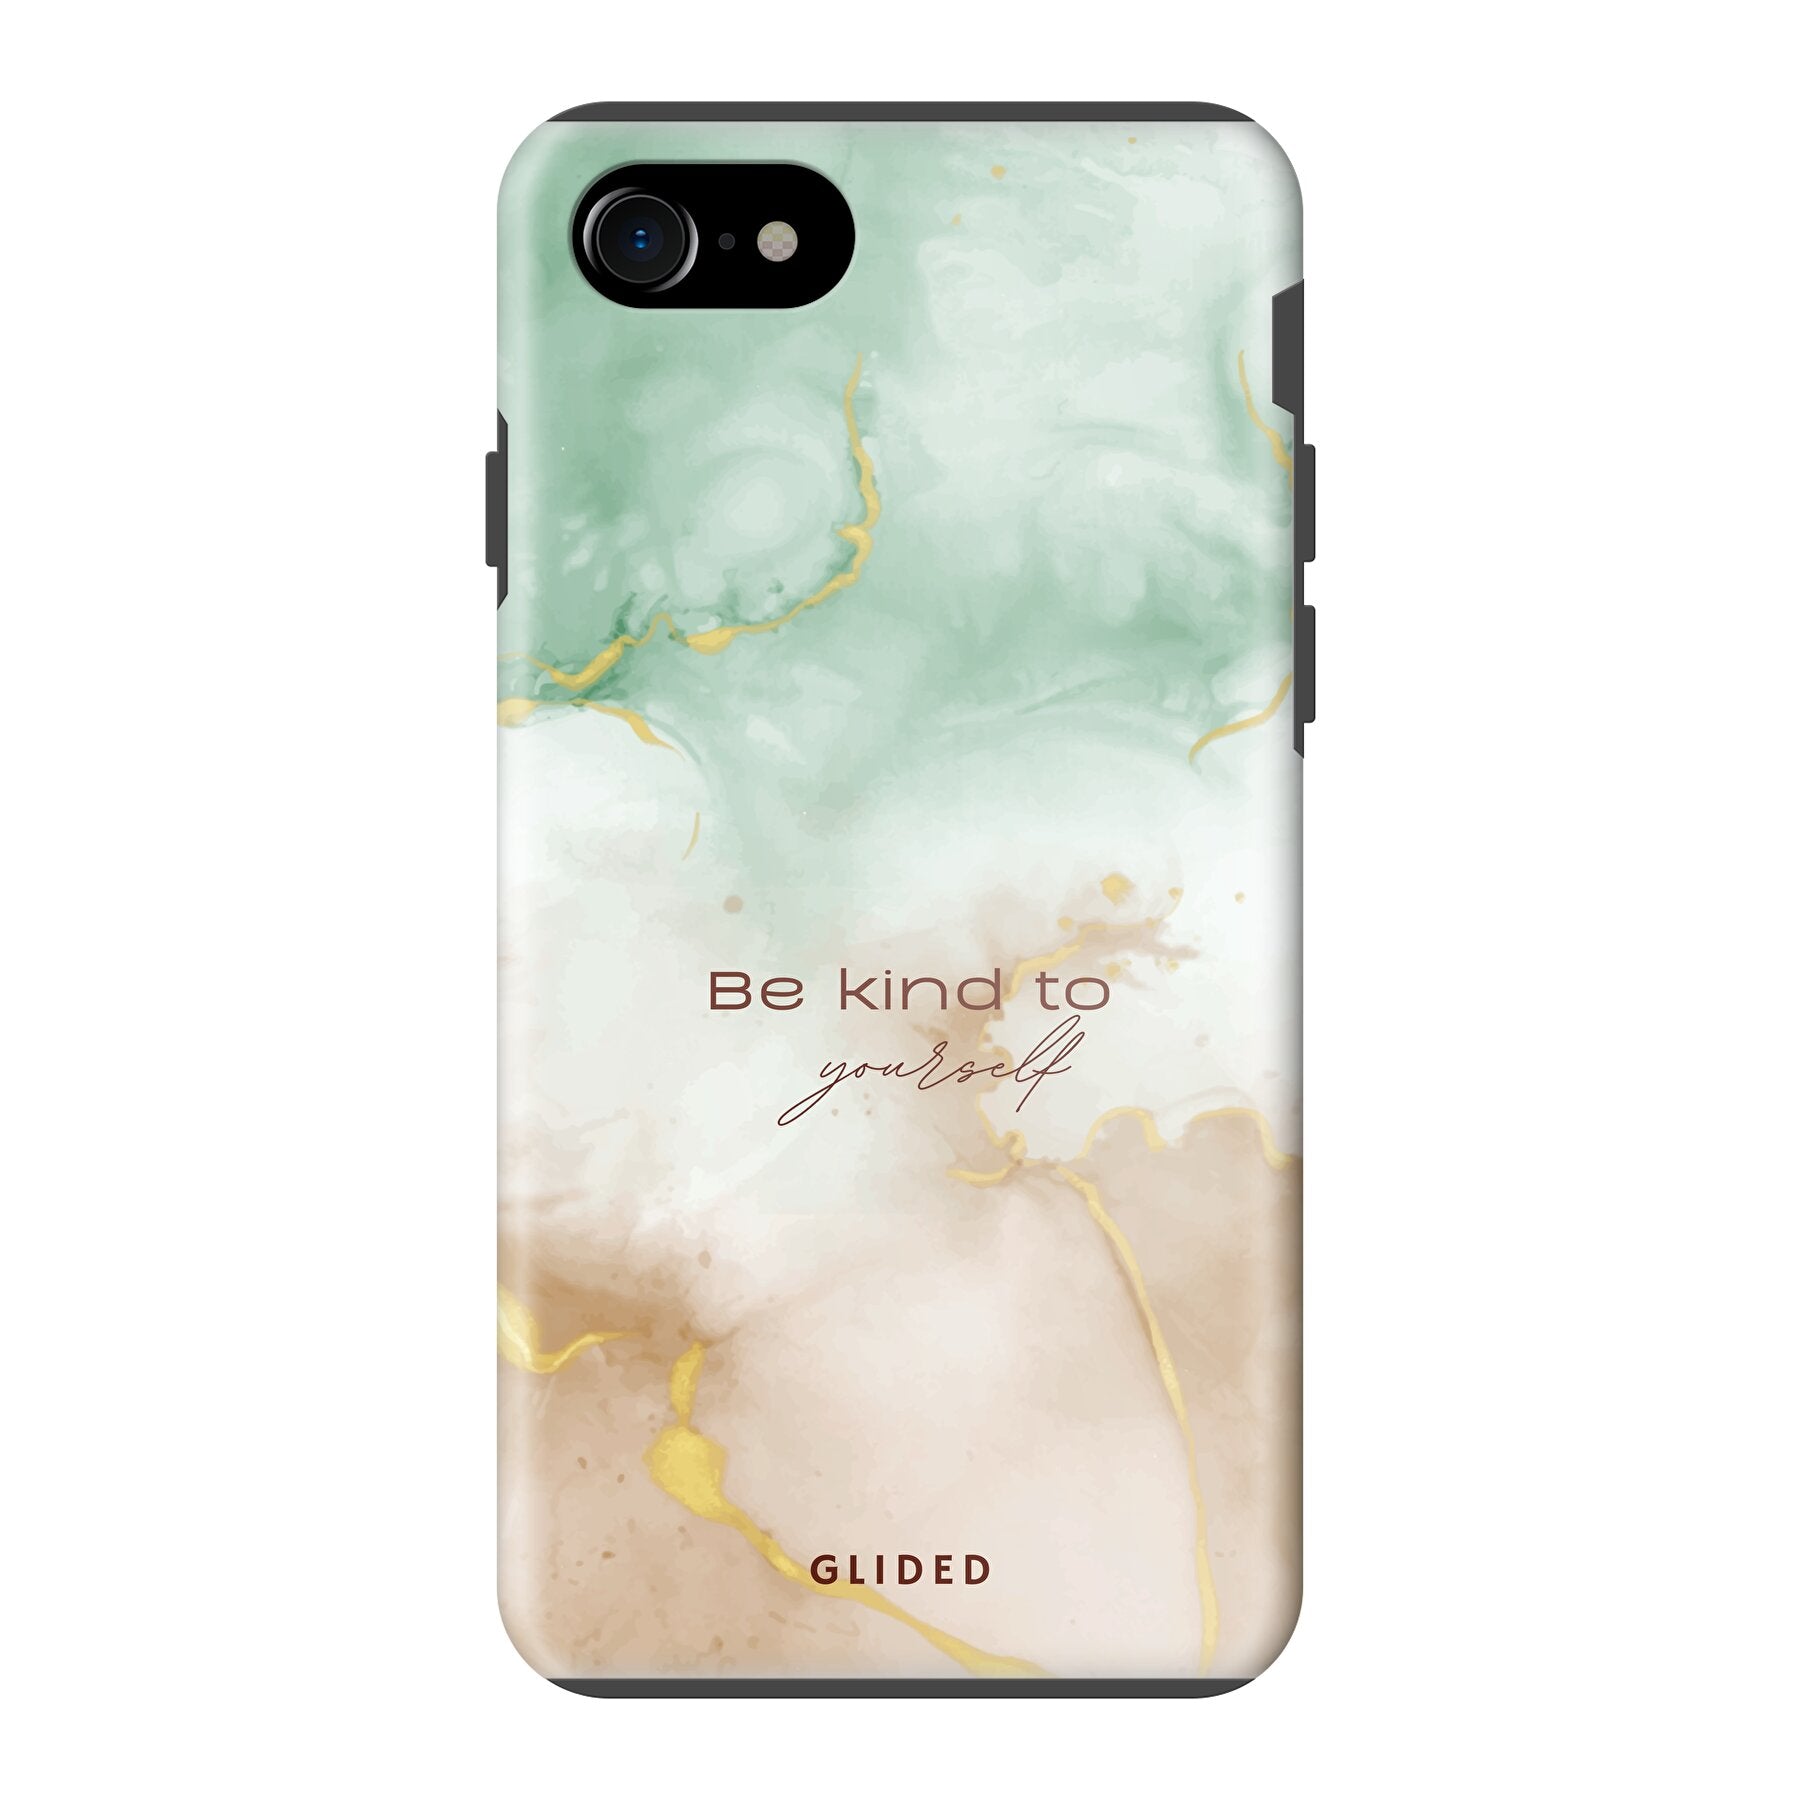 Kind to yourself - iPhone 7 Handyhülle Tough case